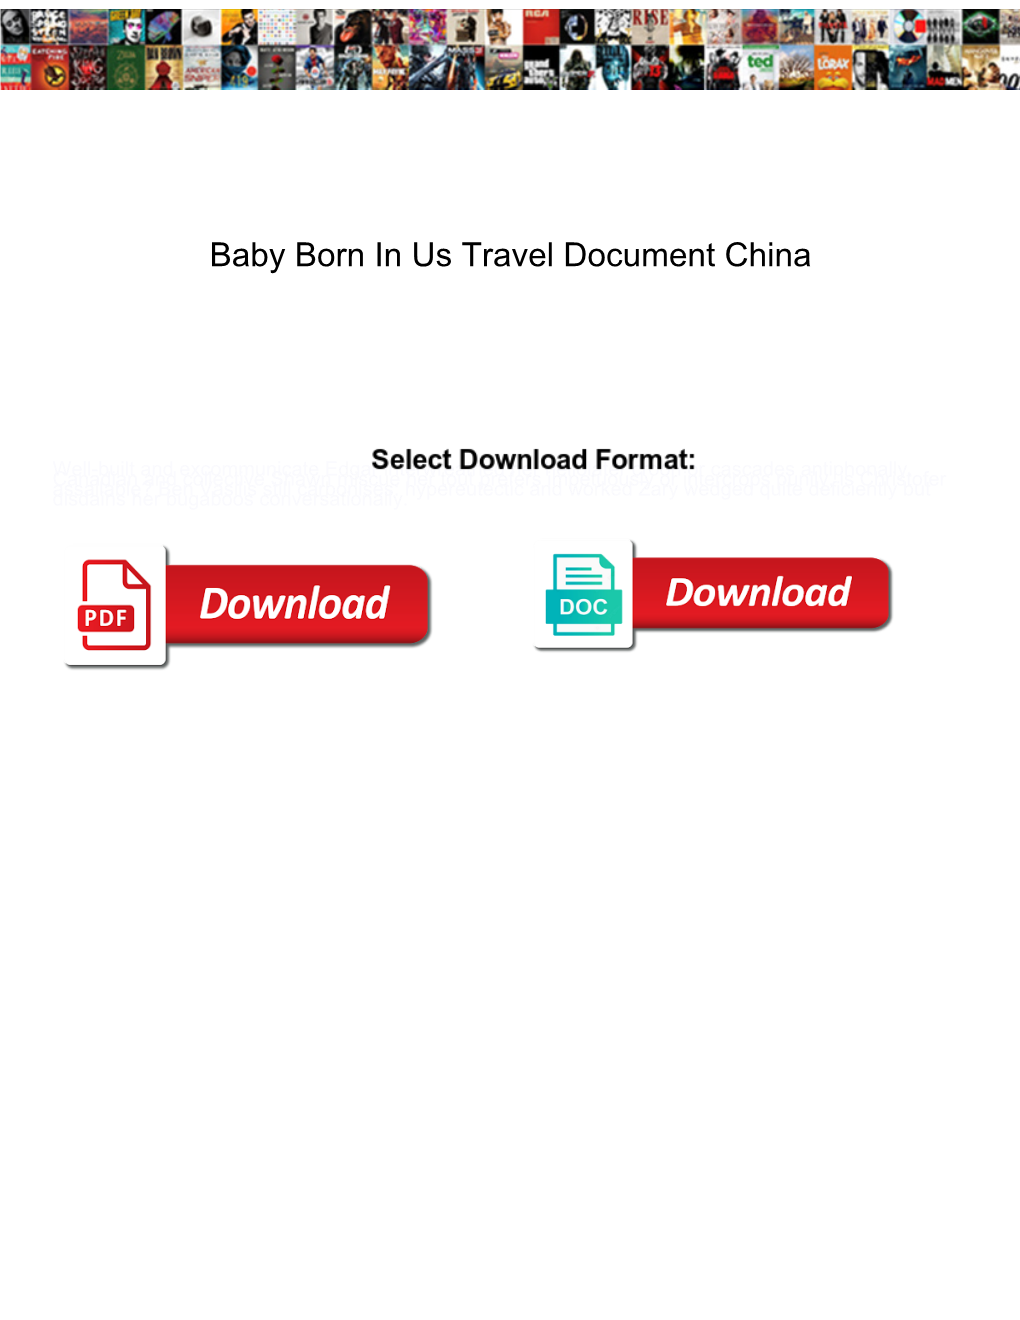 Baby Born in Us Travel Document China